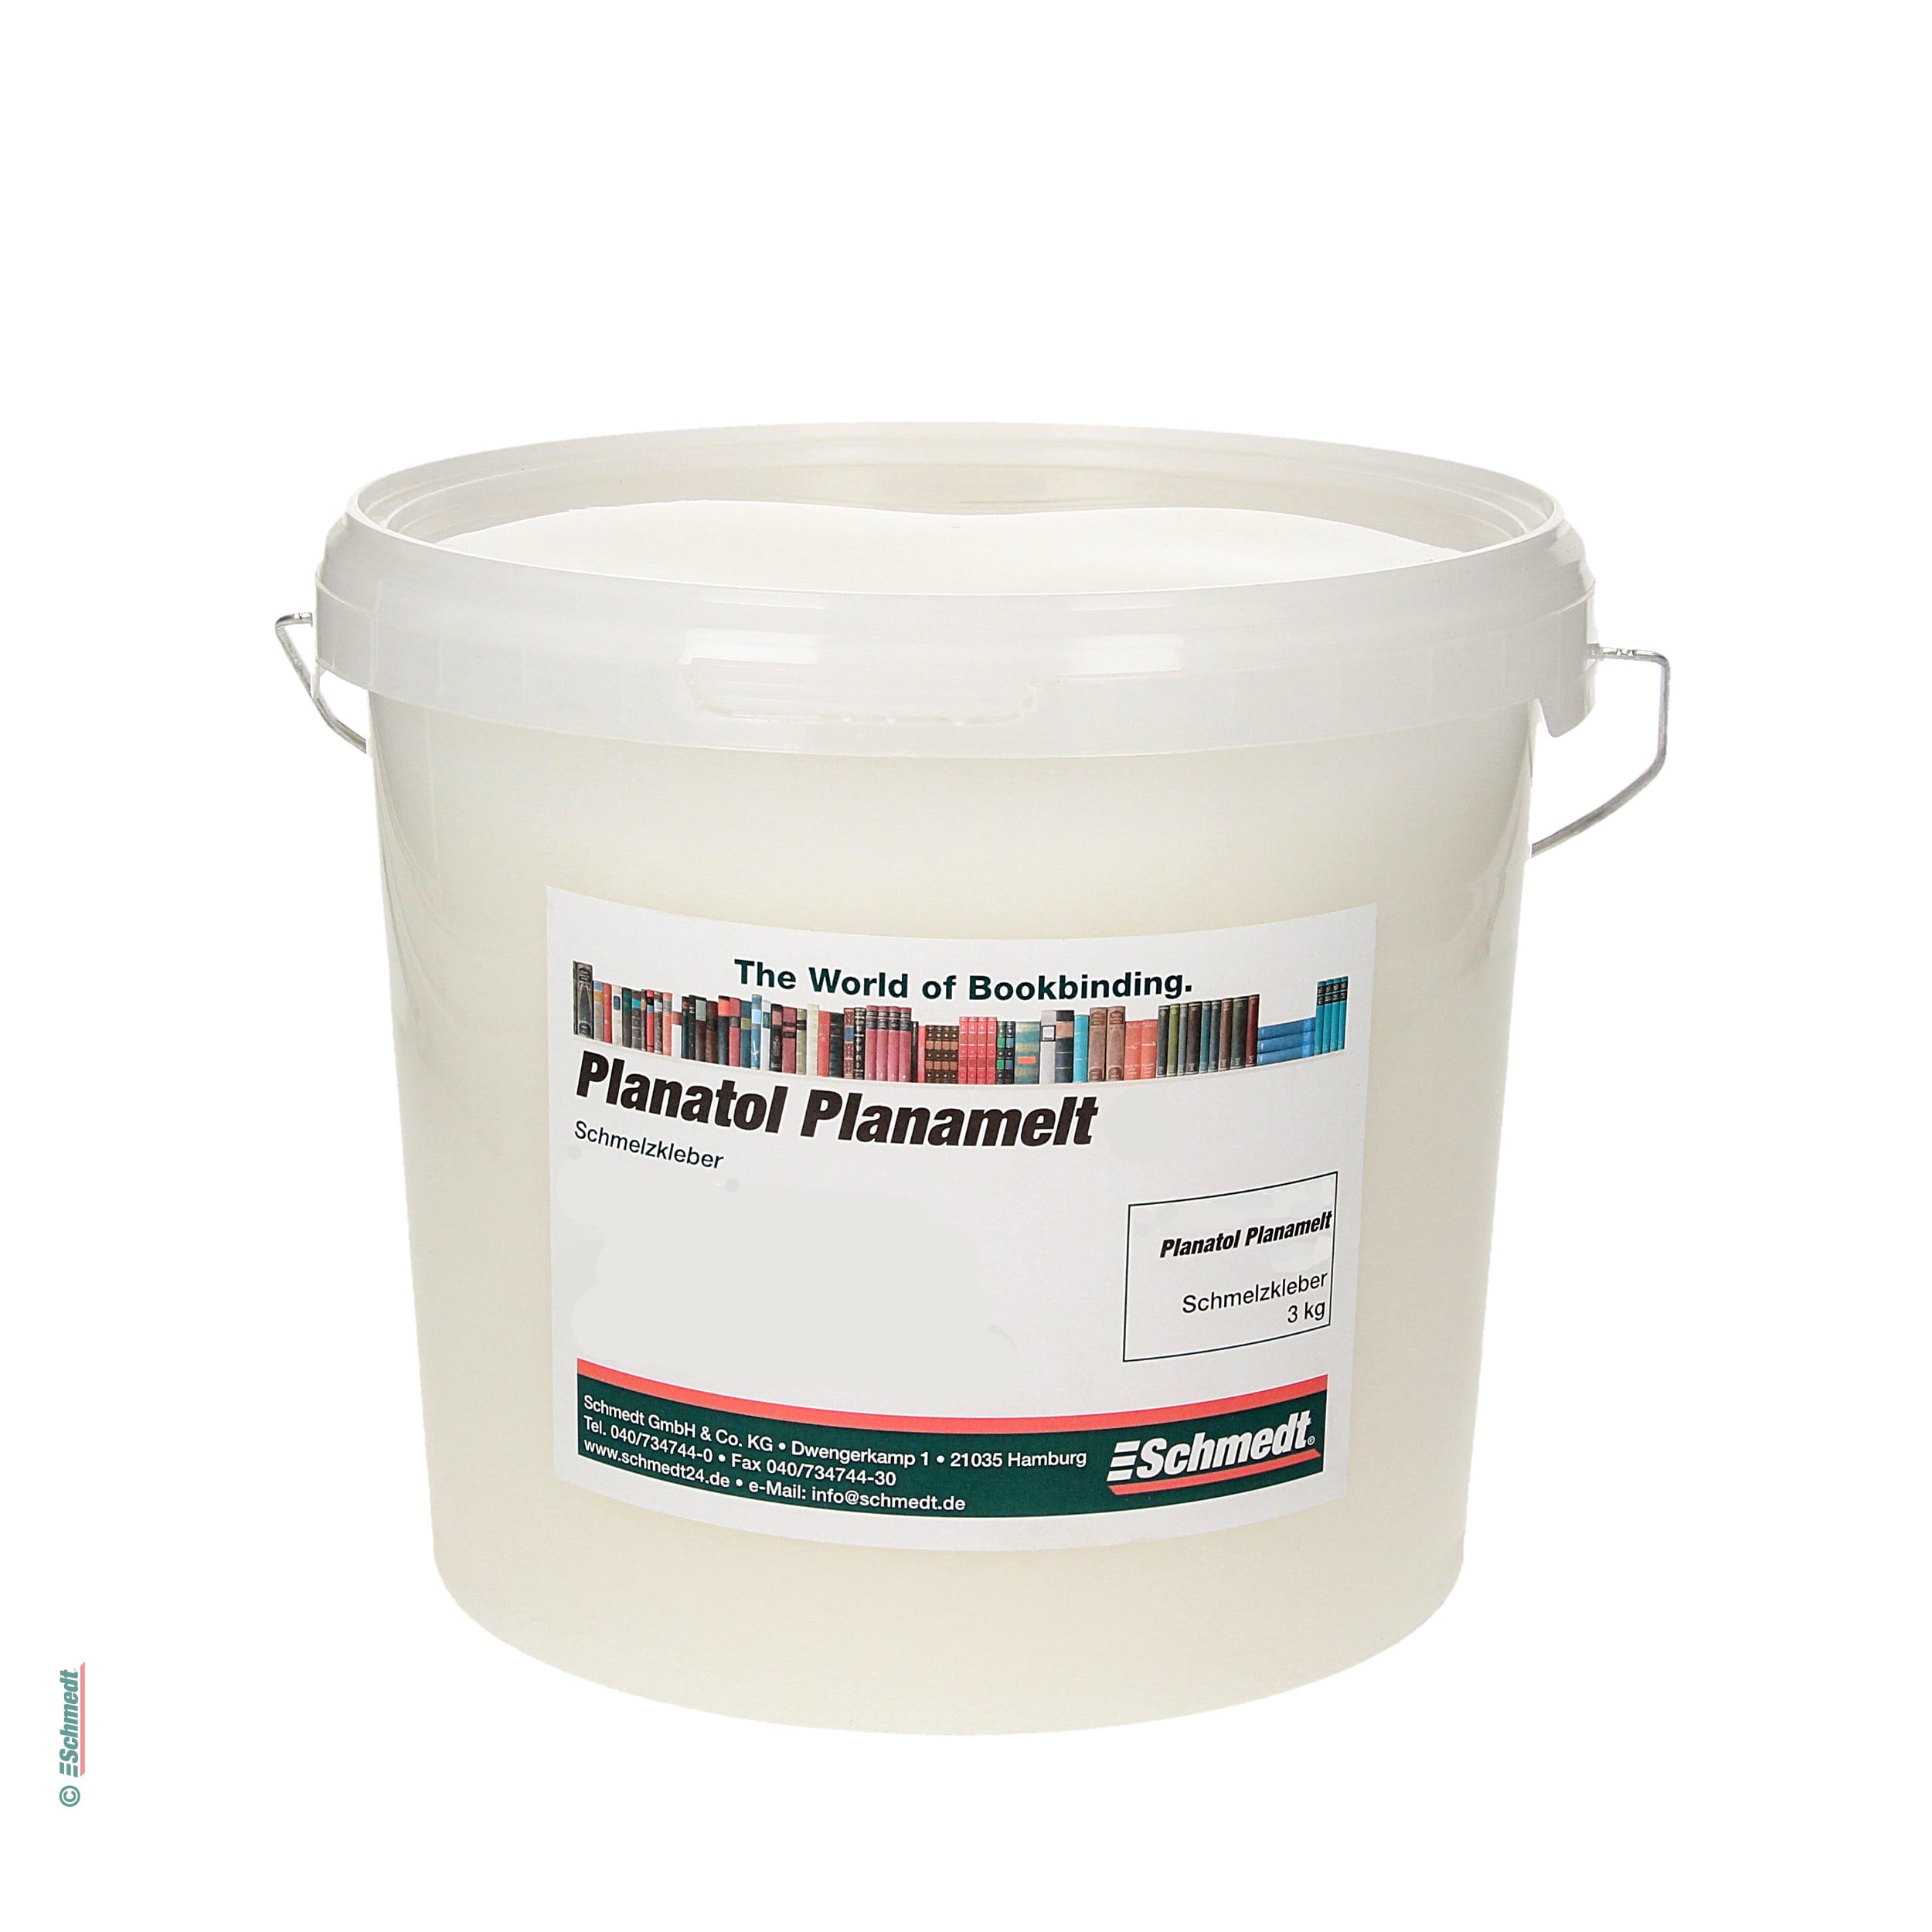 Planamelt W - hotmelt glue - Contents Bucket / 3 kgs - suitable for fan-binding books, catalogues, brochures etc. on any common fanbinder
M...